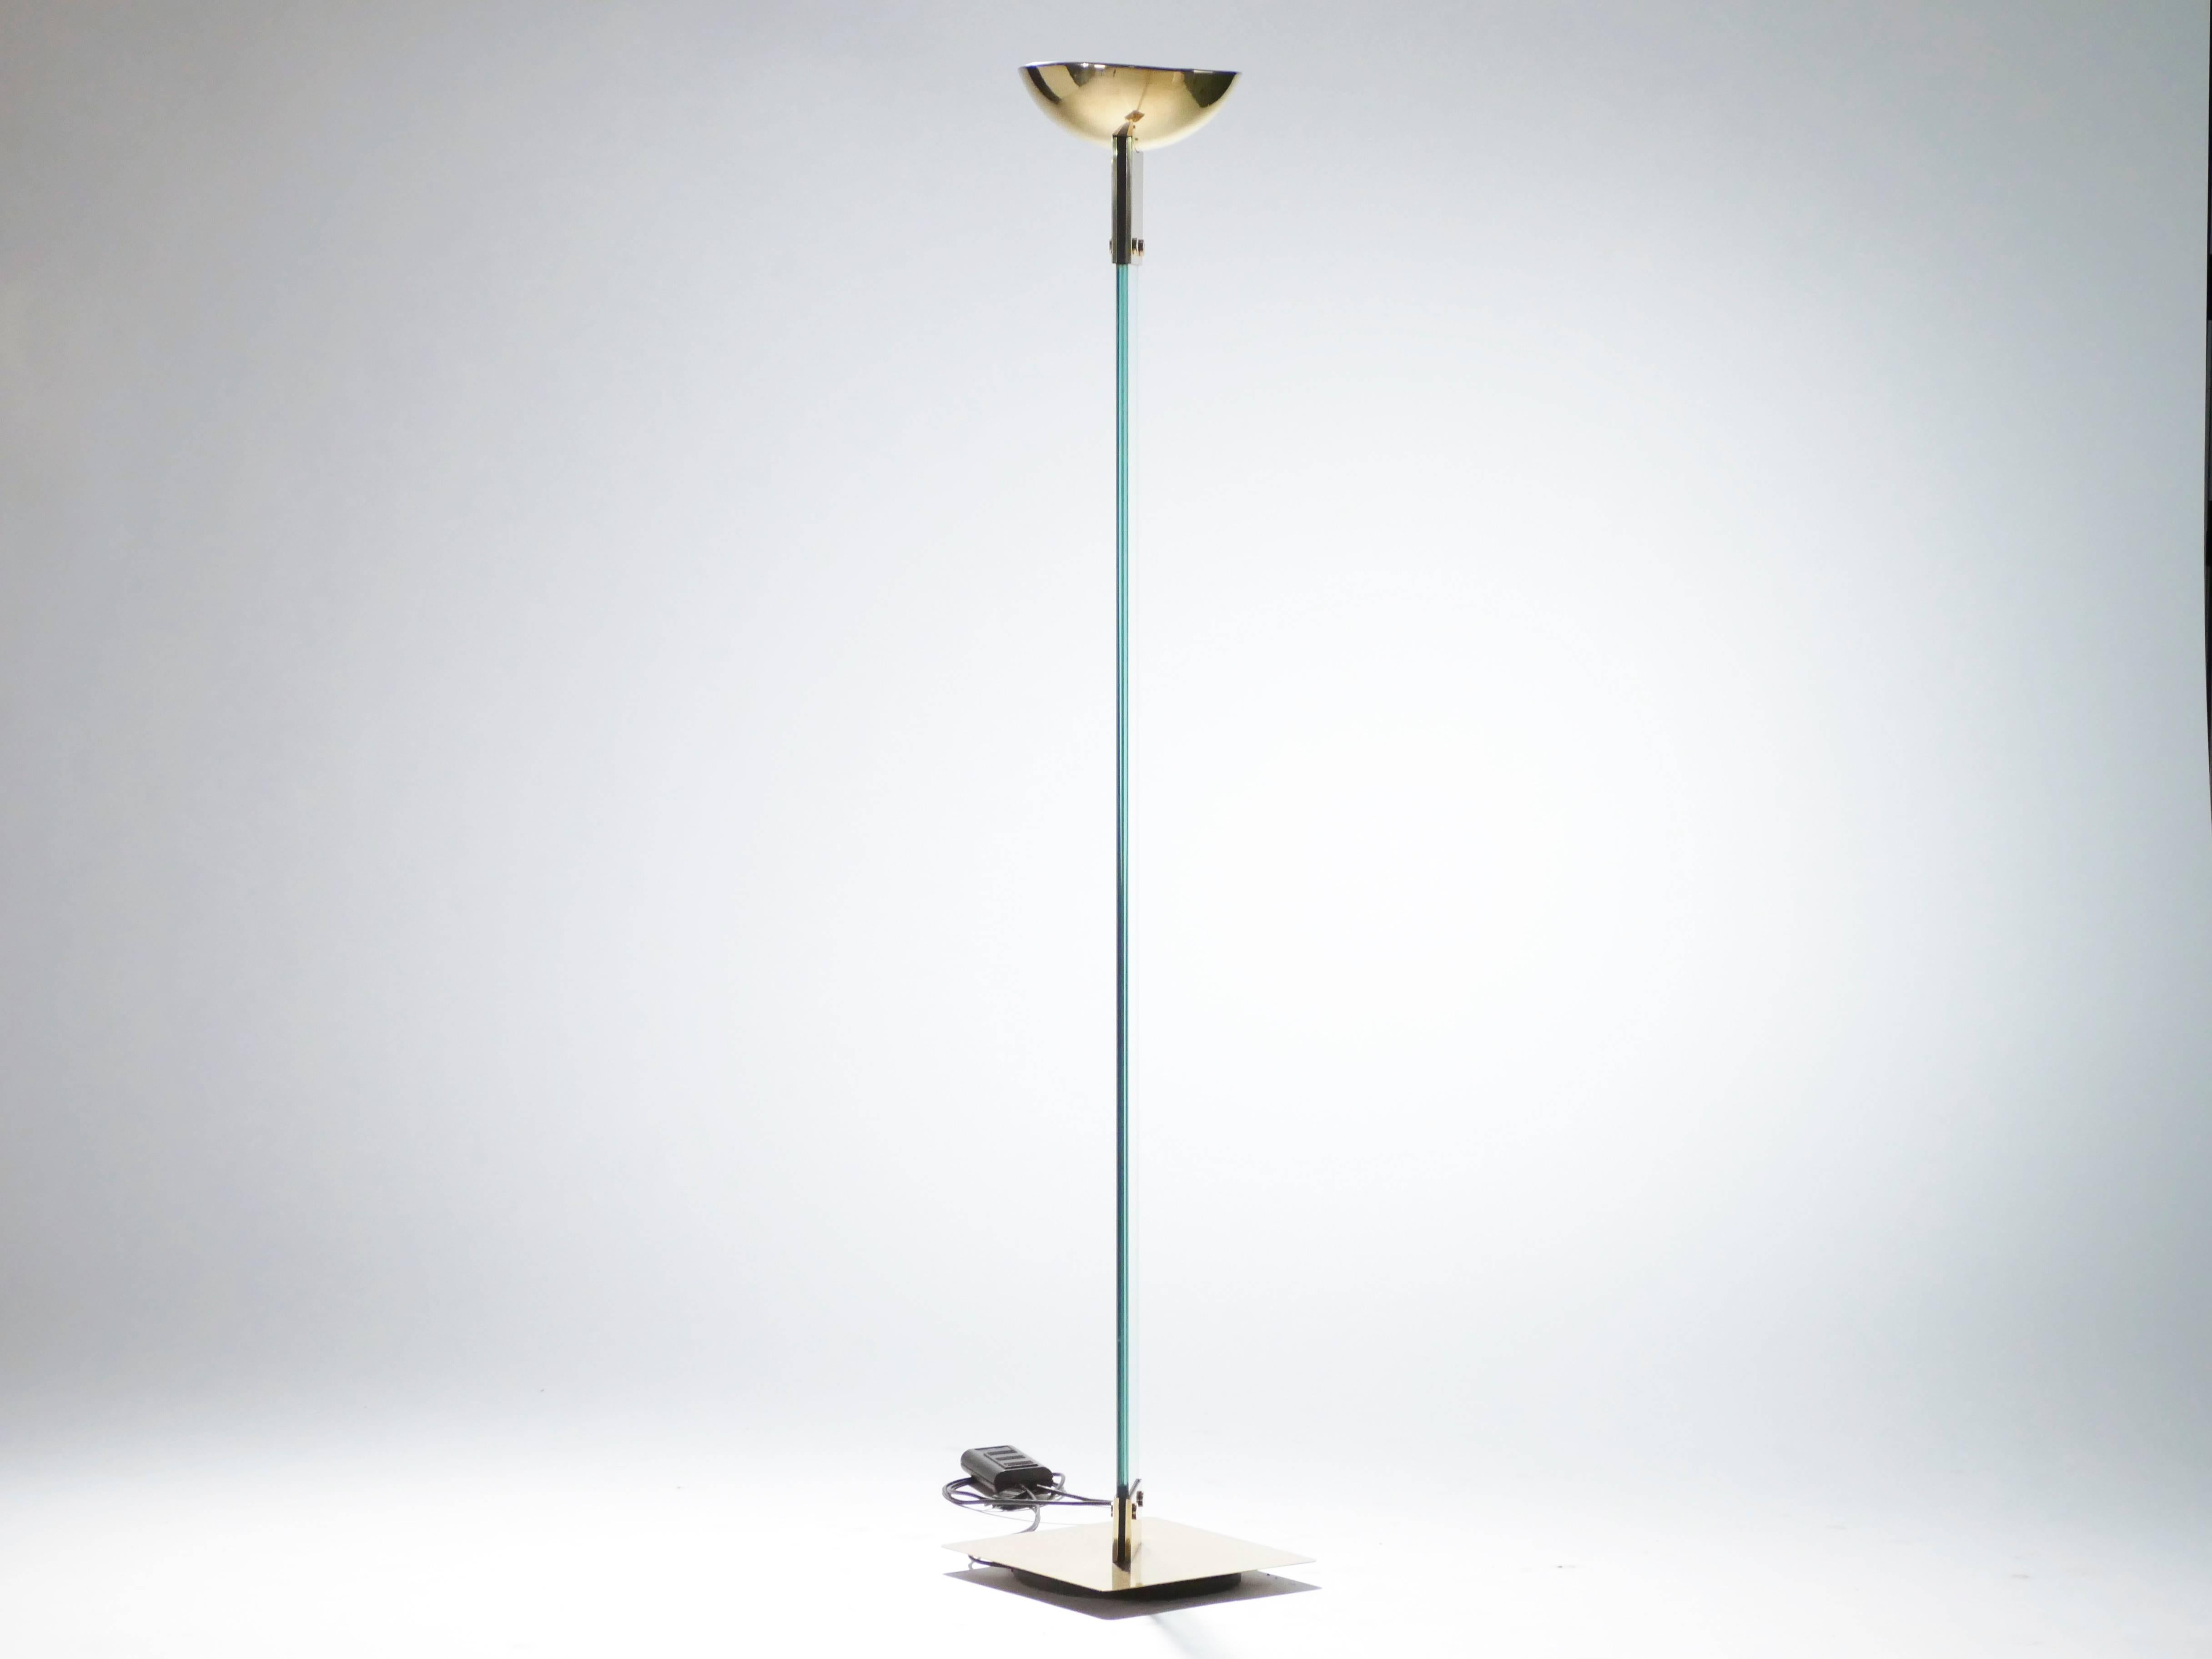 Glass and brass form this eye-catching halogen decorative lamp. Its structure is unique all the way down, from the shining brass bowl top supported by a thin sheet of glass, to the floating base. Casting an effortless Italian cool through the space